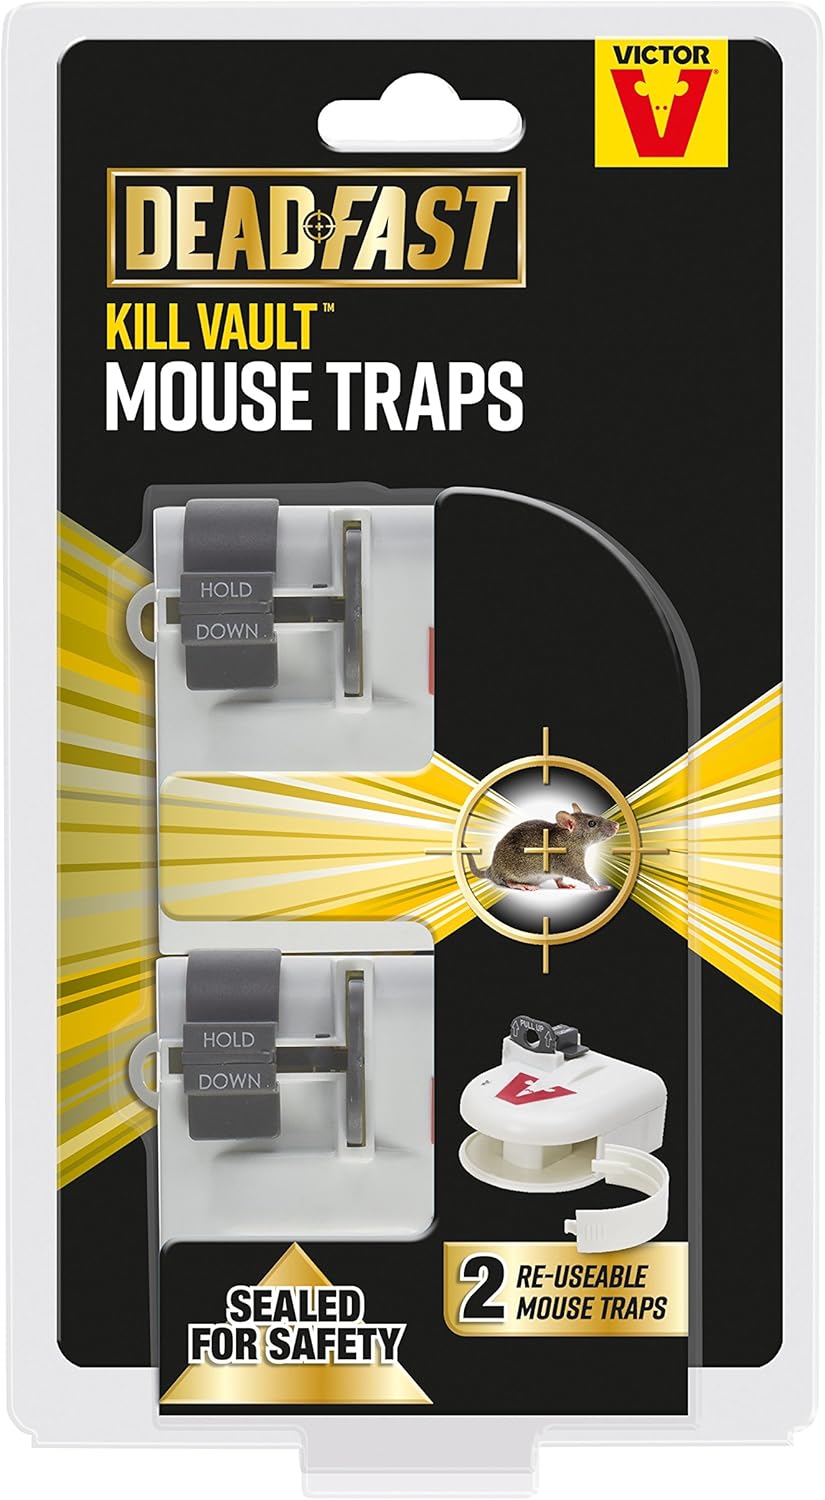 Deadfast 20300400 Kill Vault Mouse Trap, White, Twin Pack?20300400